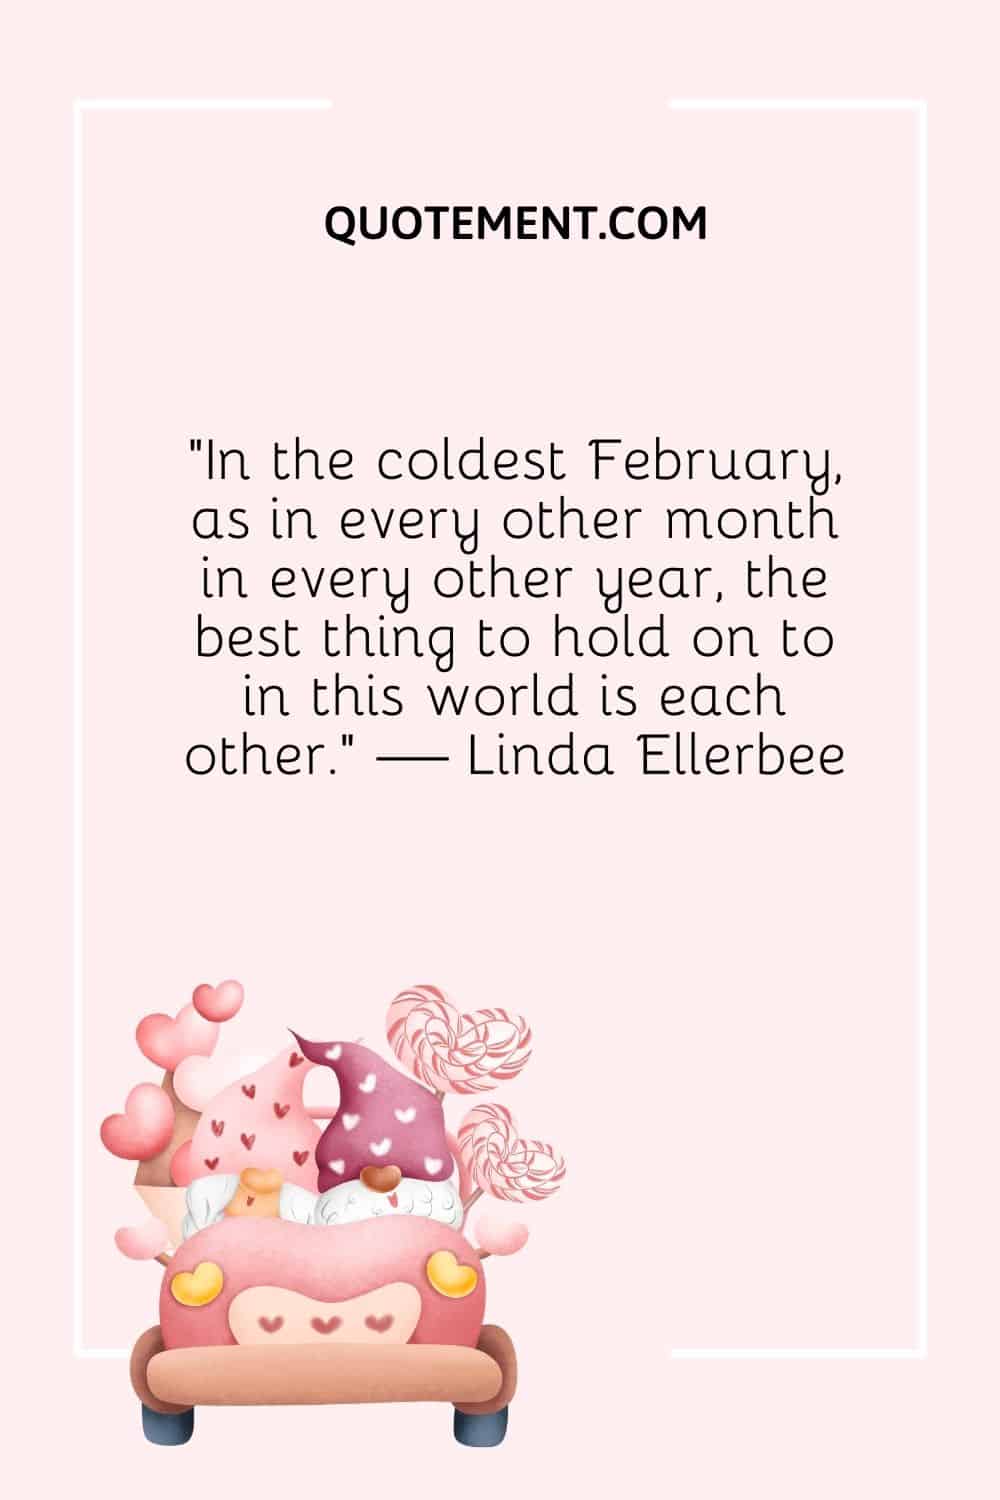 “In the coldest February, as in every other month in every other year, the best thing to hold on to in this world is each other.” — Linda Ellerbee